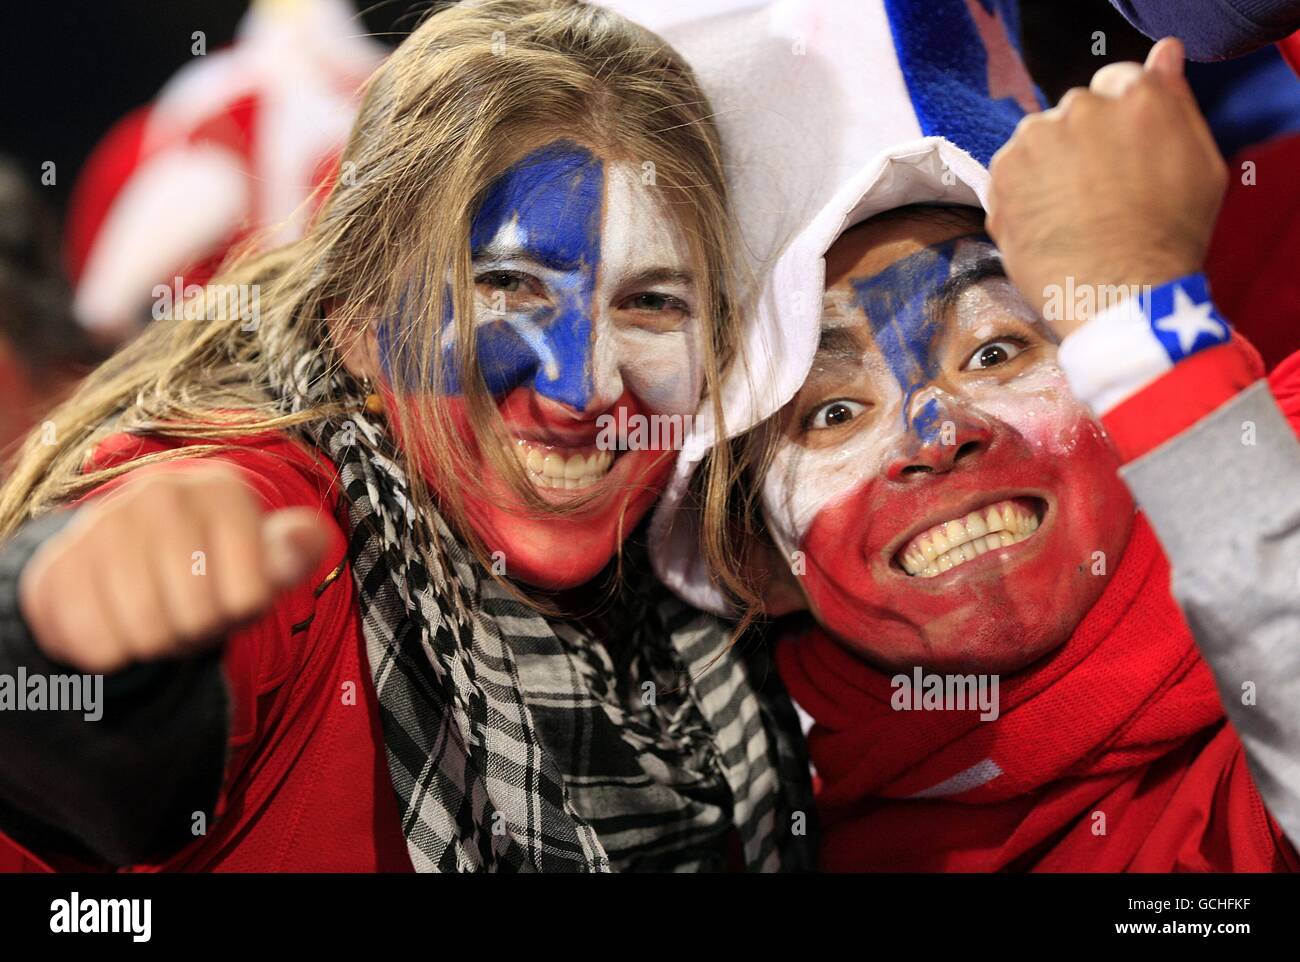 Chile fans celebrate in the stands after progressing to the next round Stock Photo